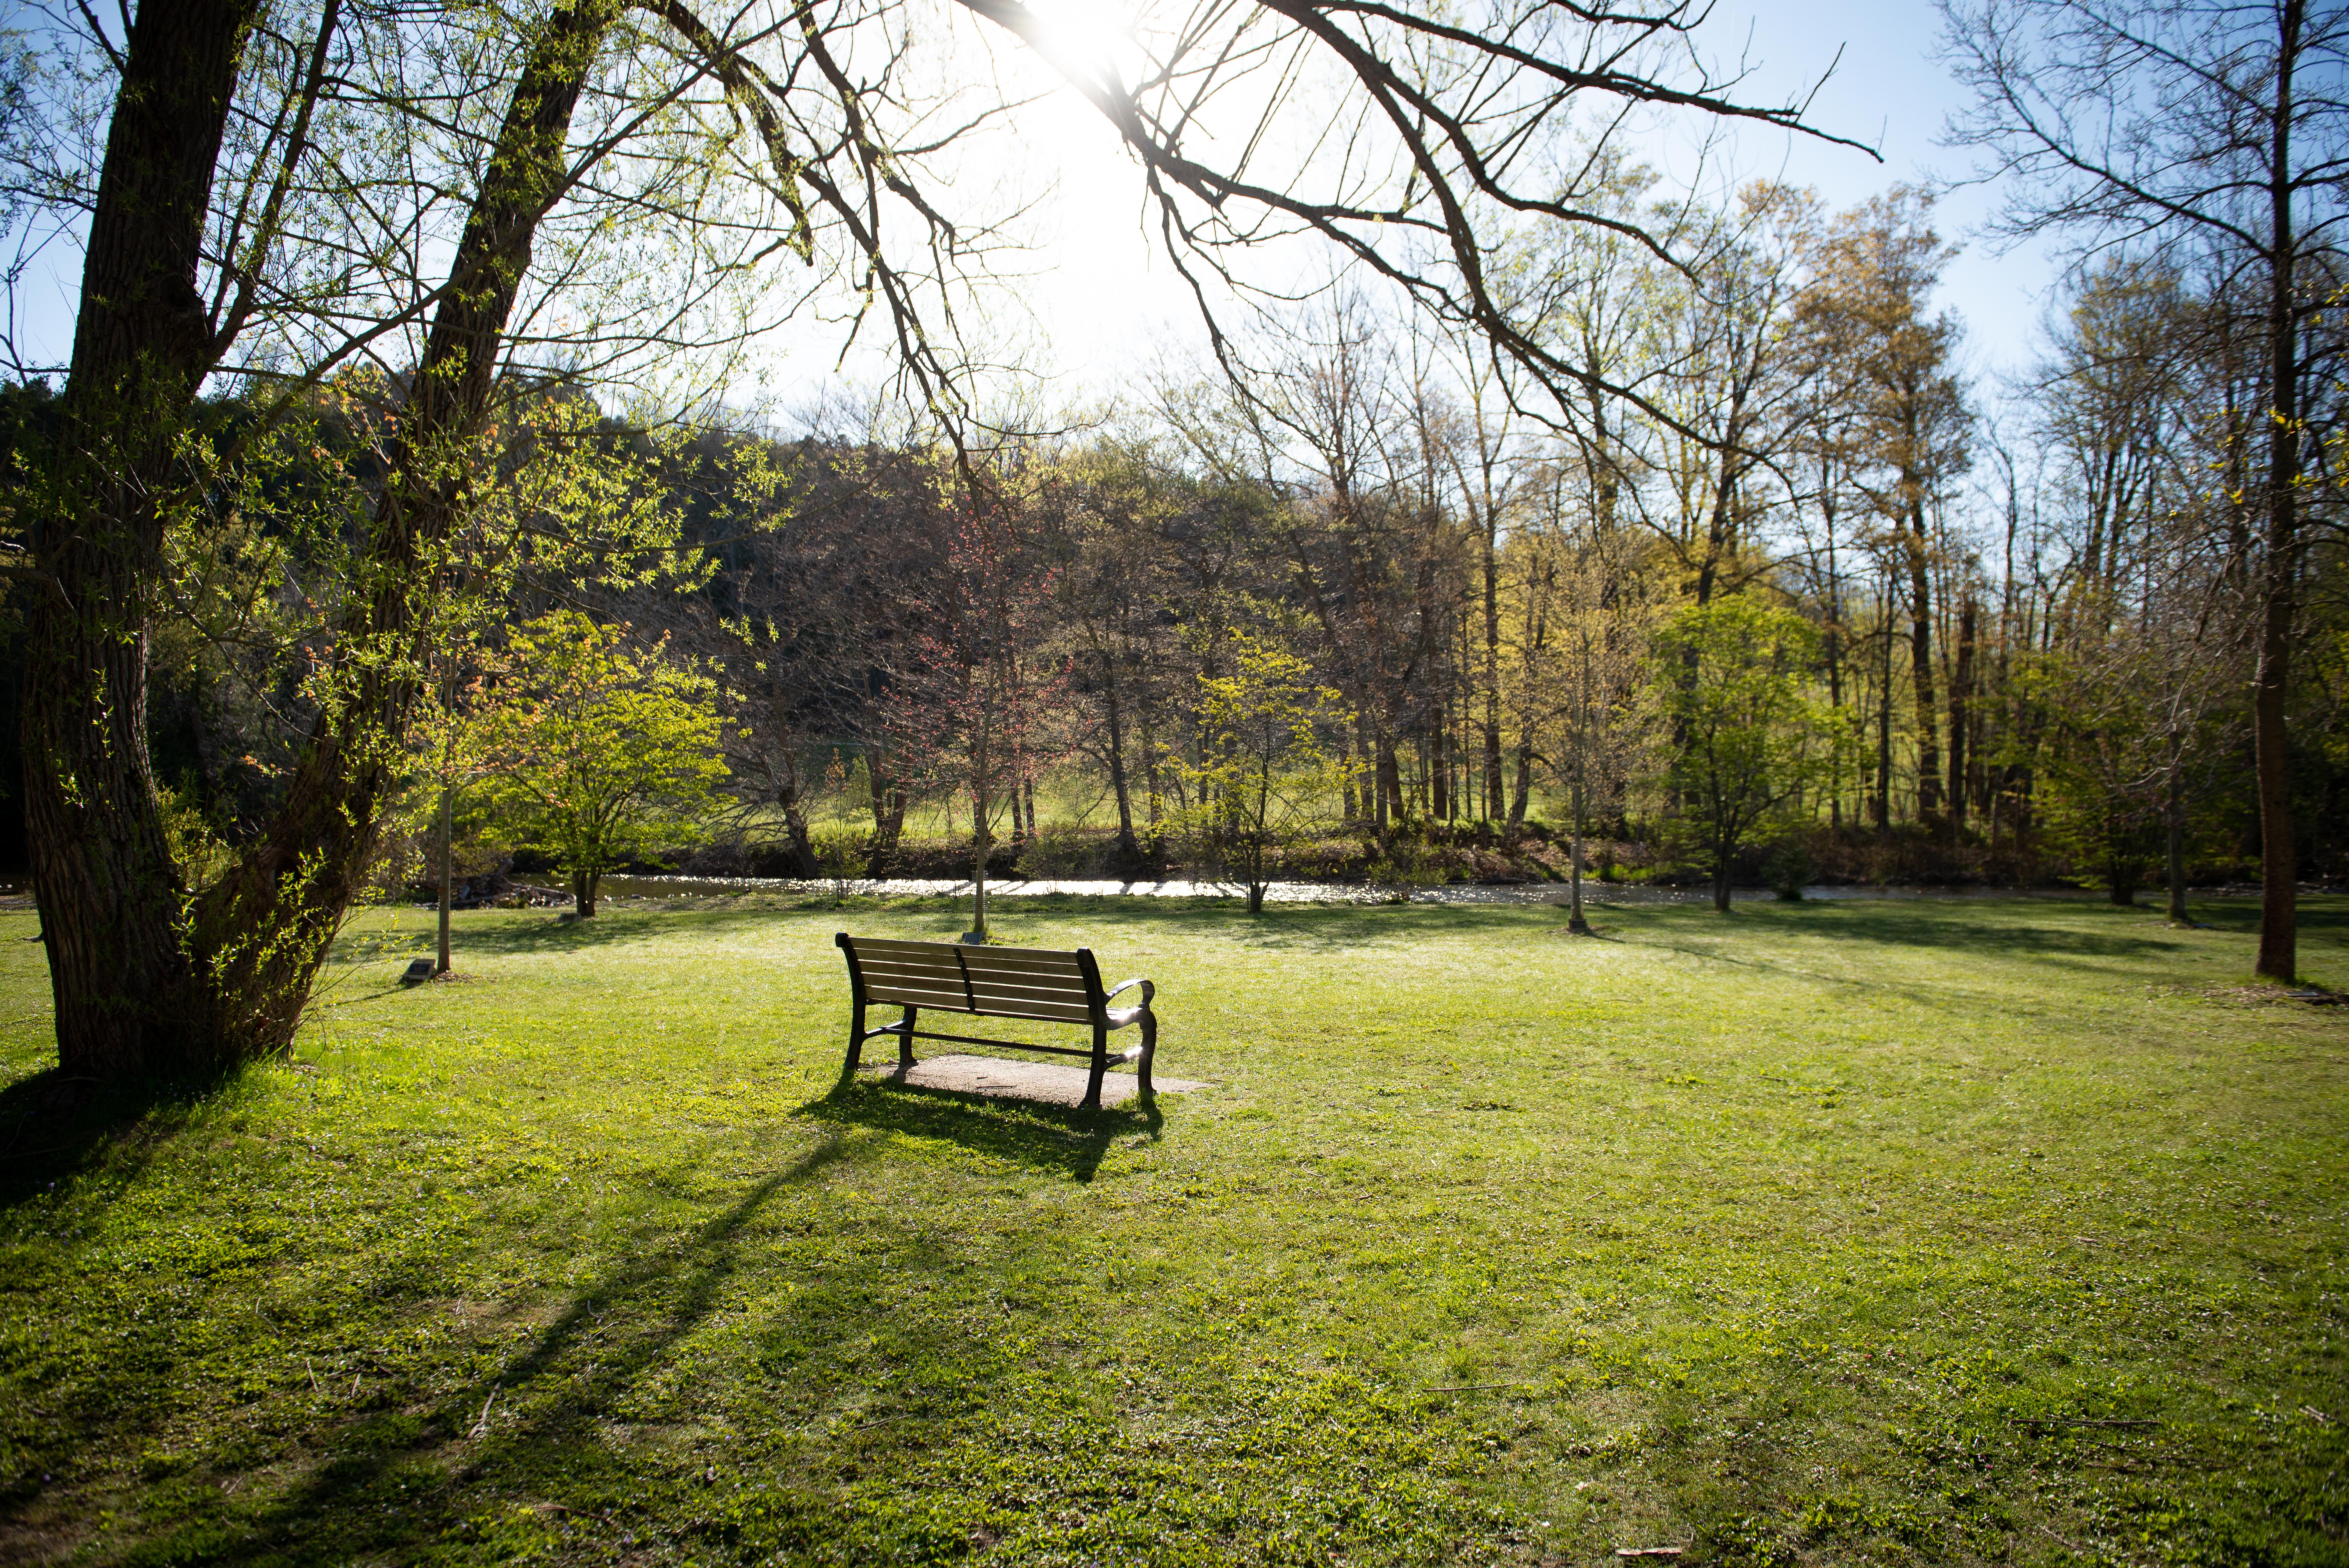 A park bench in the grass at Harrison Park